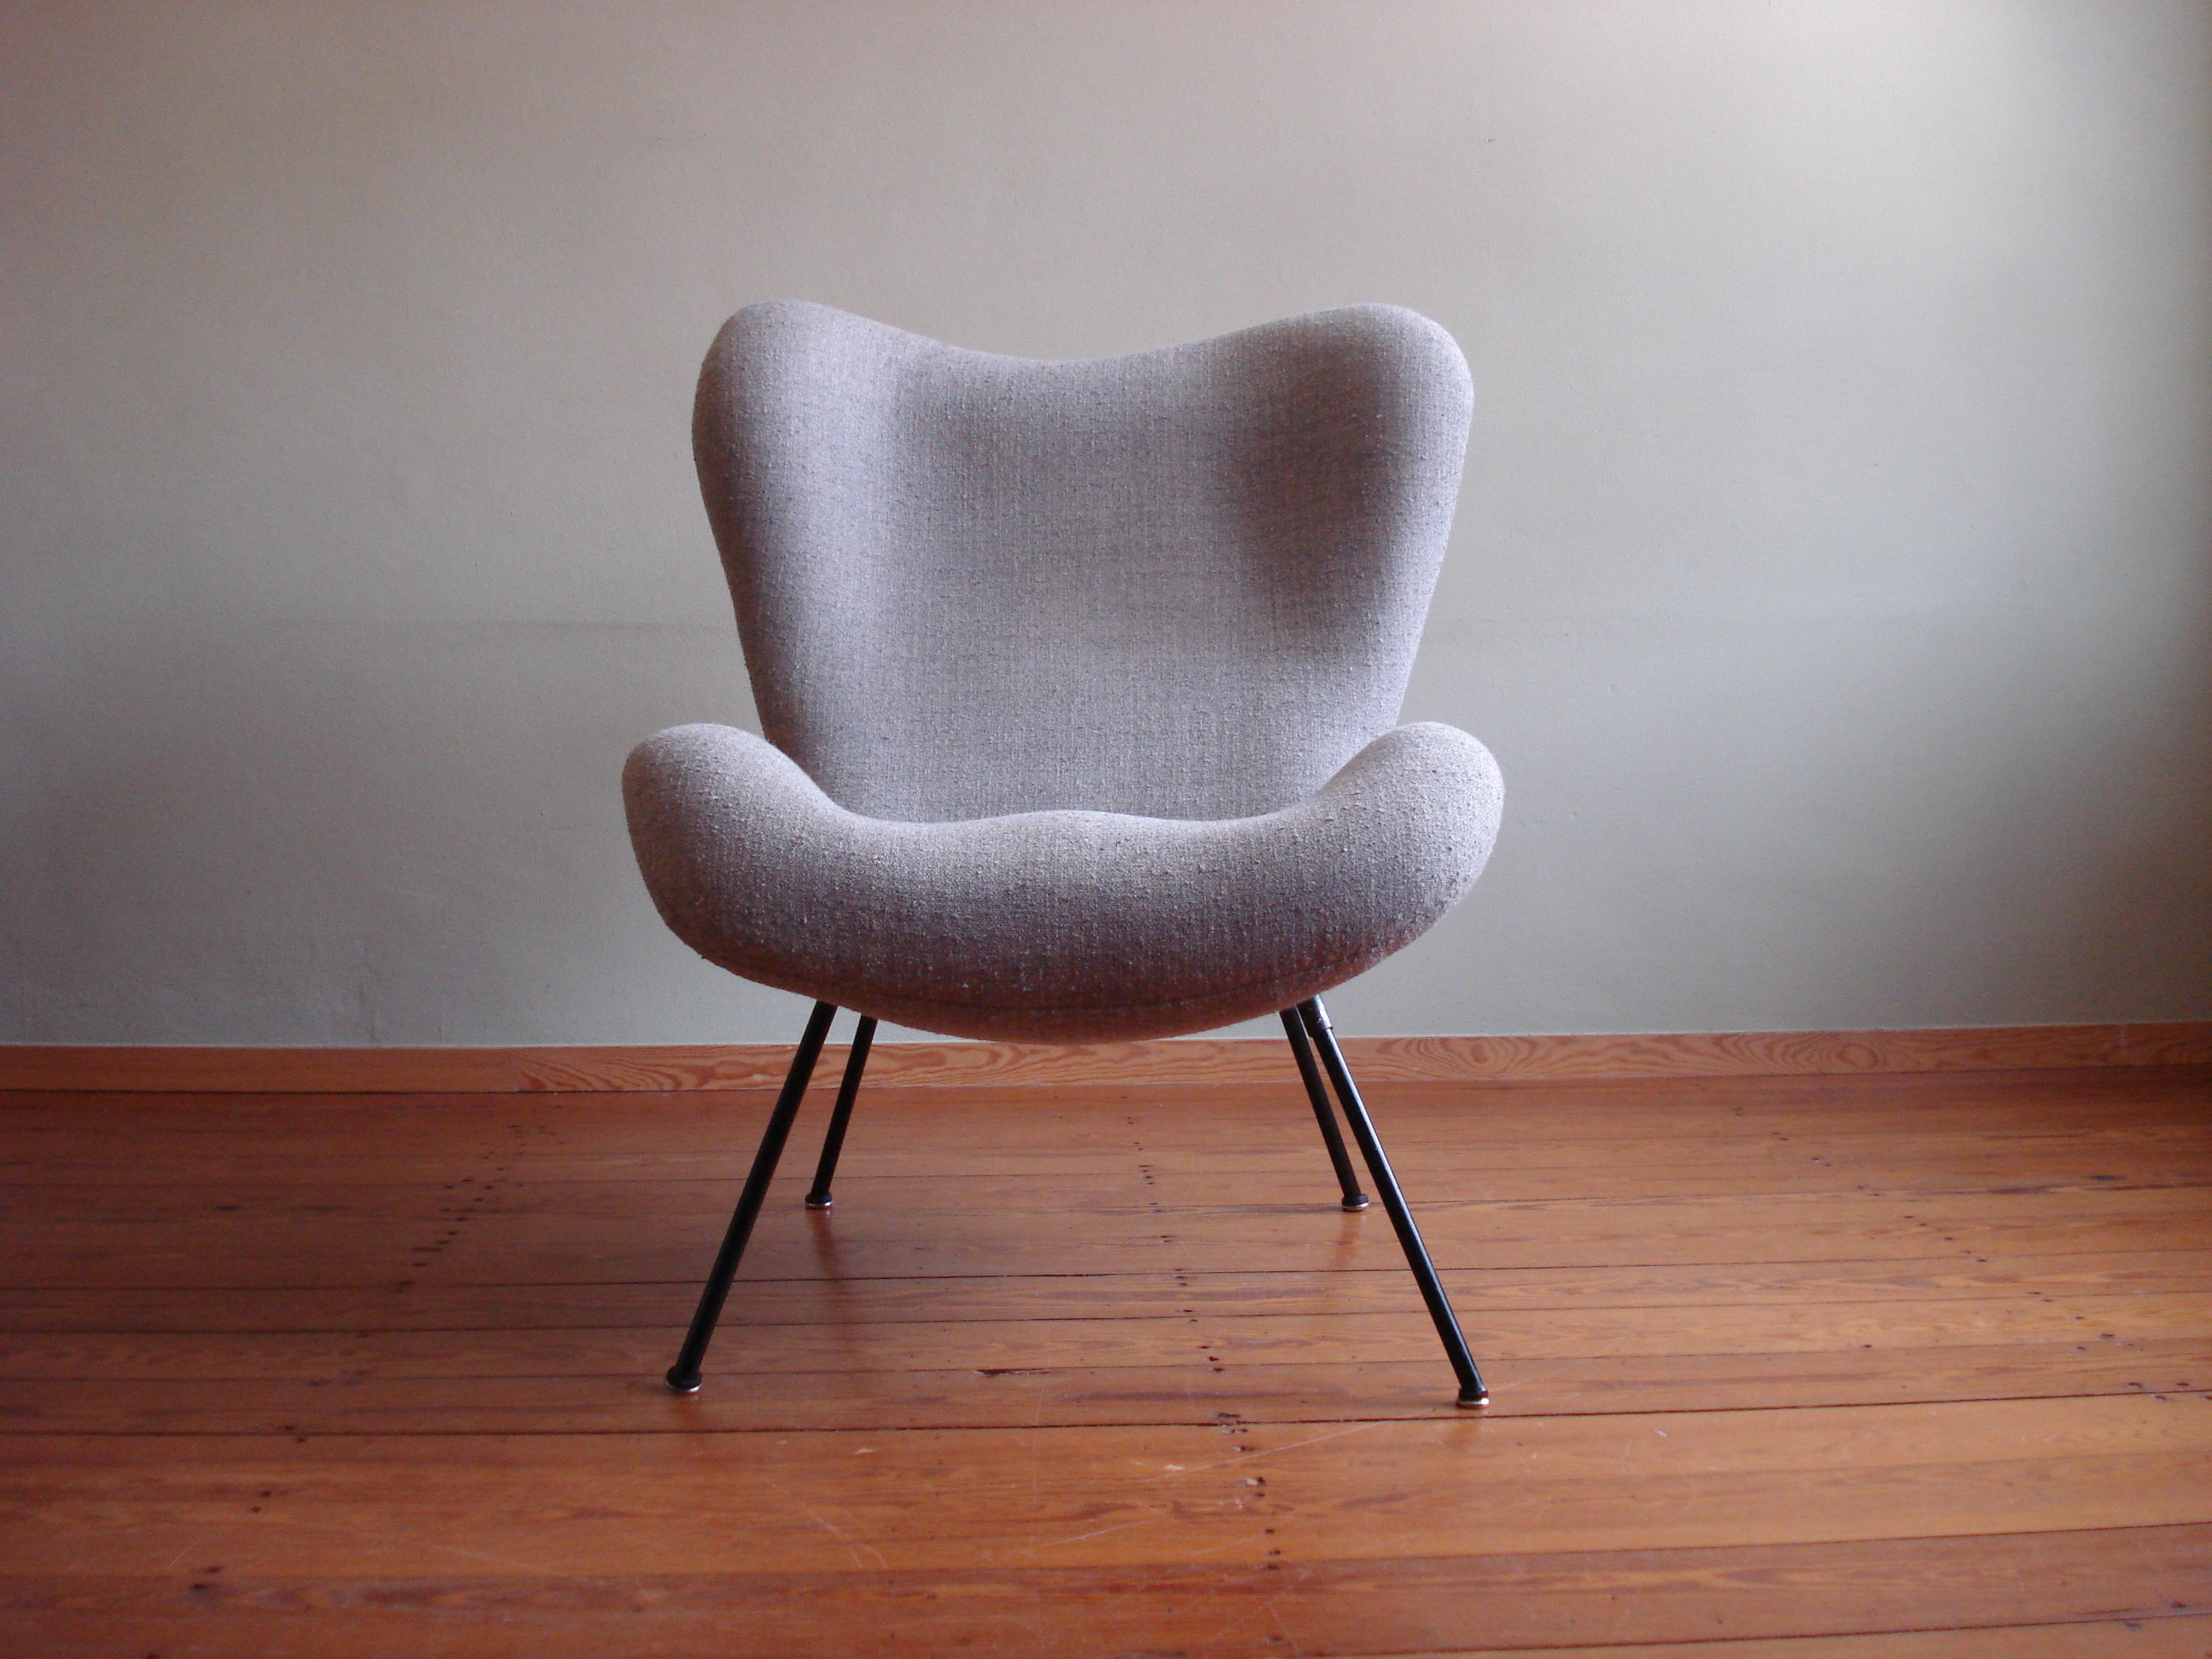 What a rarity! The iconic Madame chair, designed by Fritz Neth and manufactured by Correcta in the 1950s. 
Typical, organic-lines-design for that time and in marvelous condition. 

Only thing worth mentioning, one of the legs was reenforced